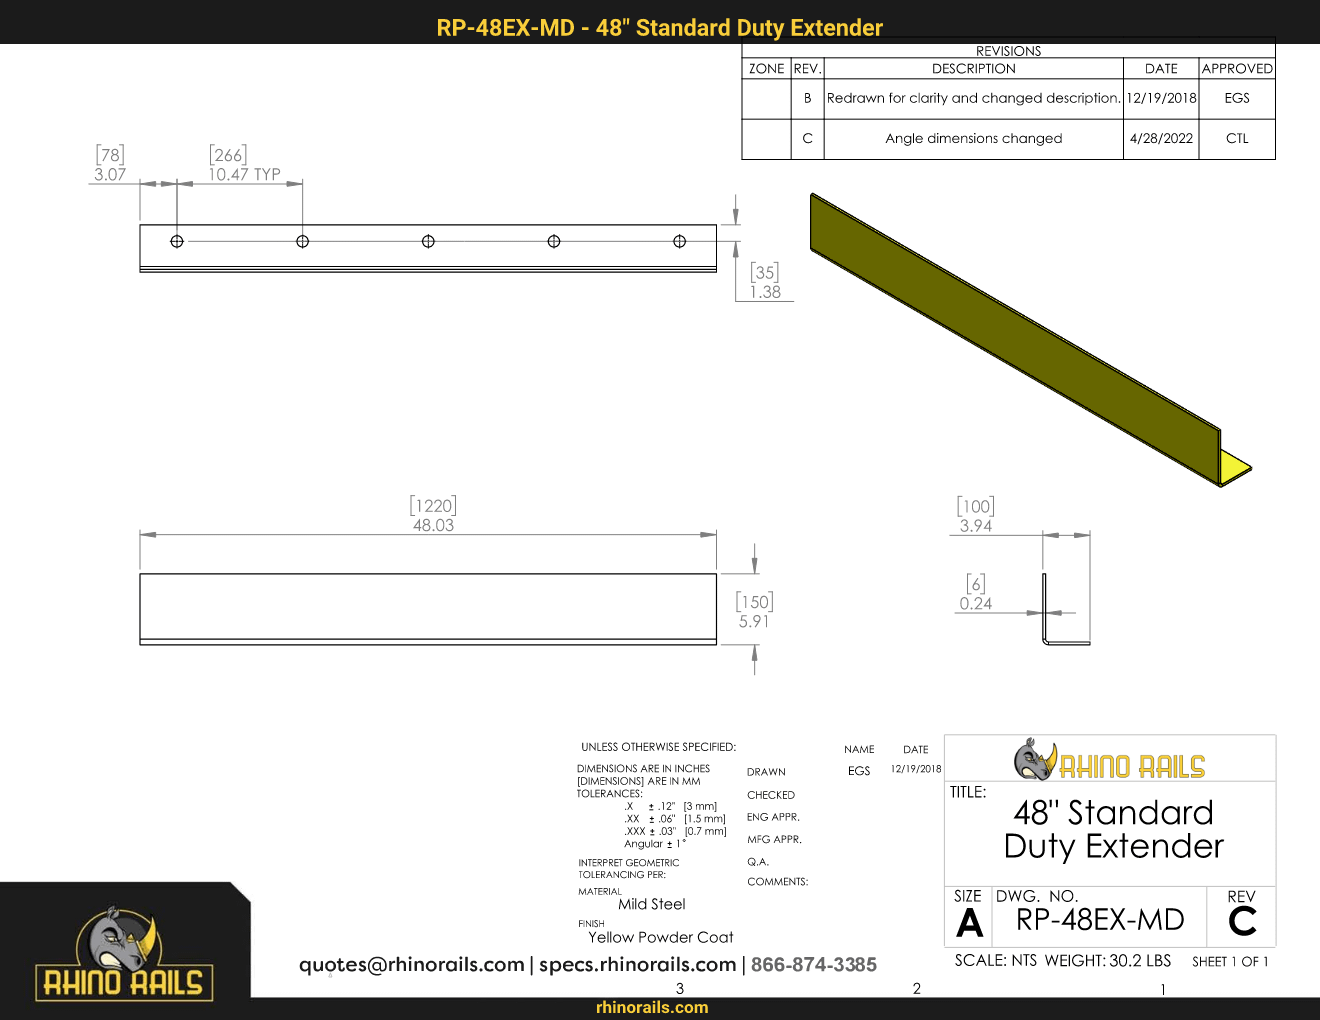 RR-RP-48EX-MD - Product Detail Drawing - Photo